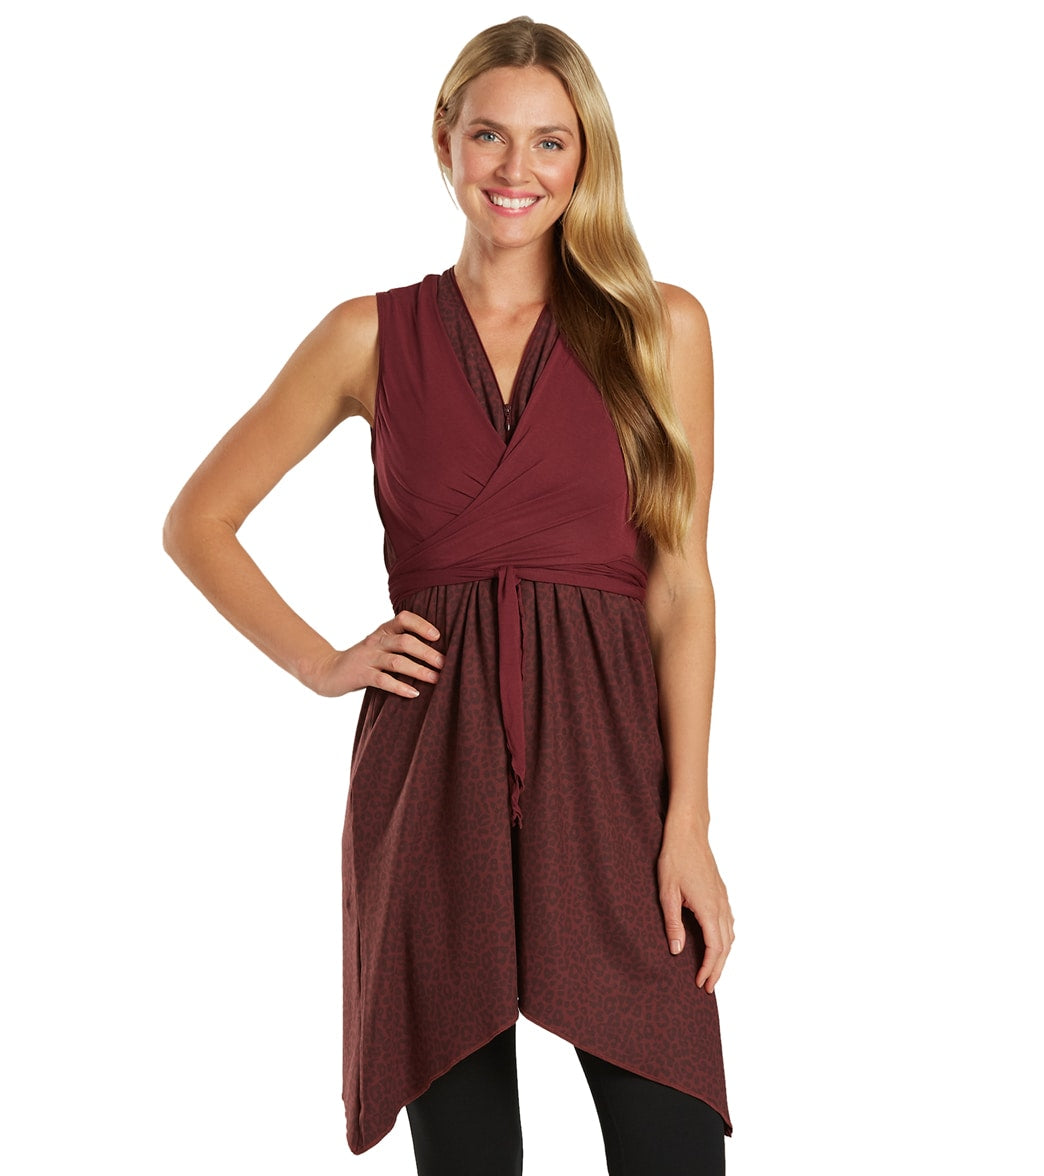 Everyday Yoga Wondrous Solid Wrap Dress at YogaOutlet.com - Free